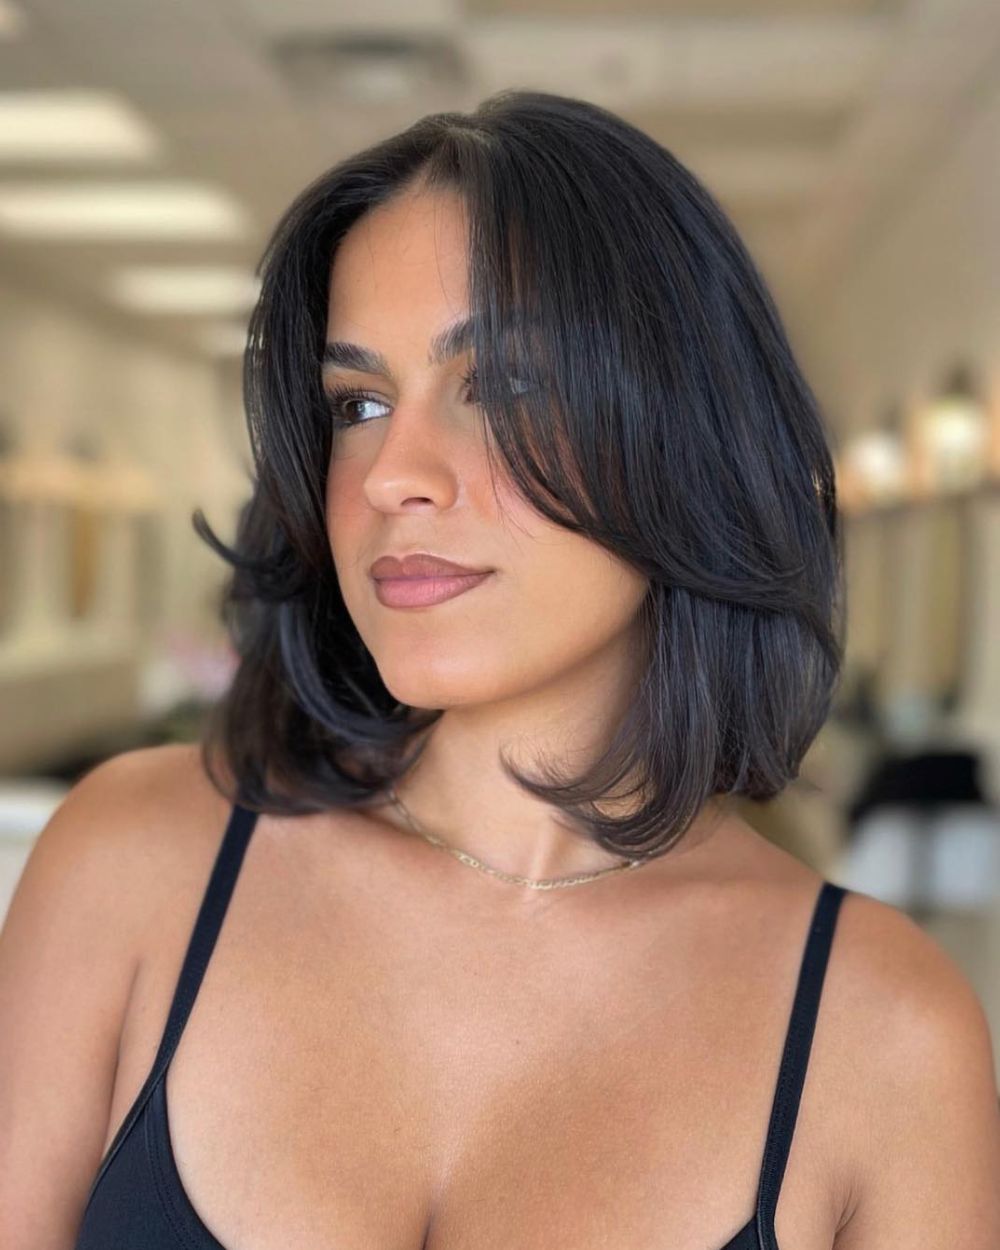 The "Old Money" Bob Is the Chic Hair Trend Popular Right Now